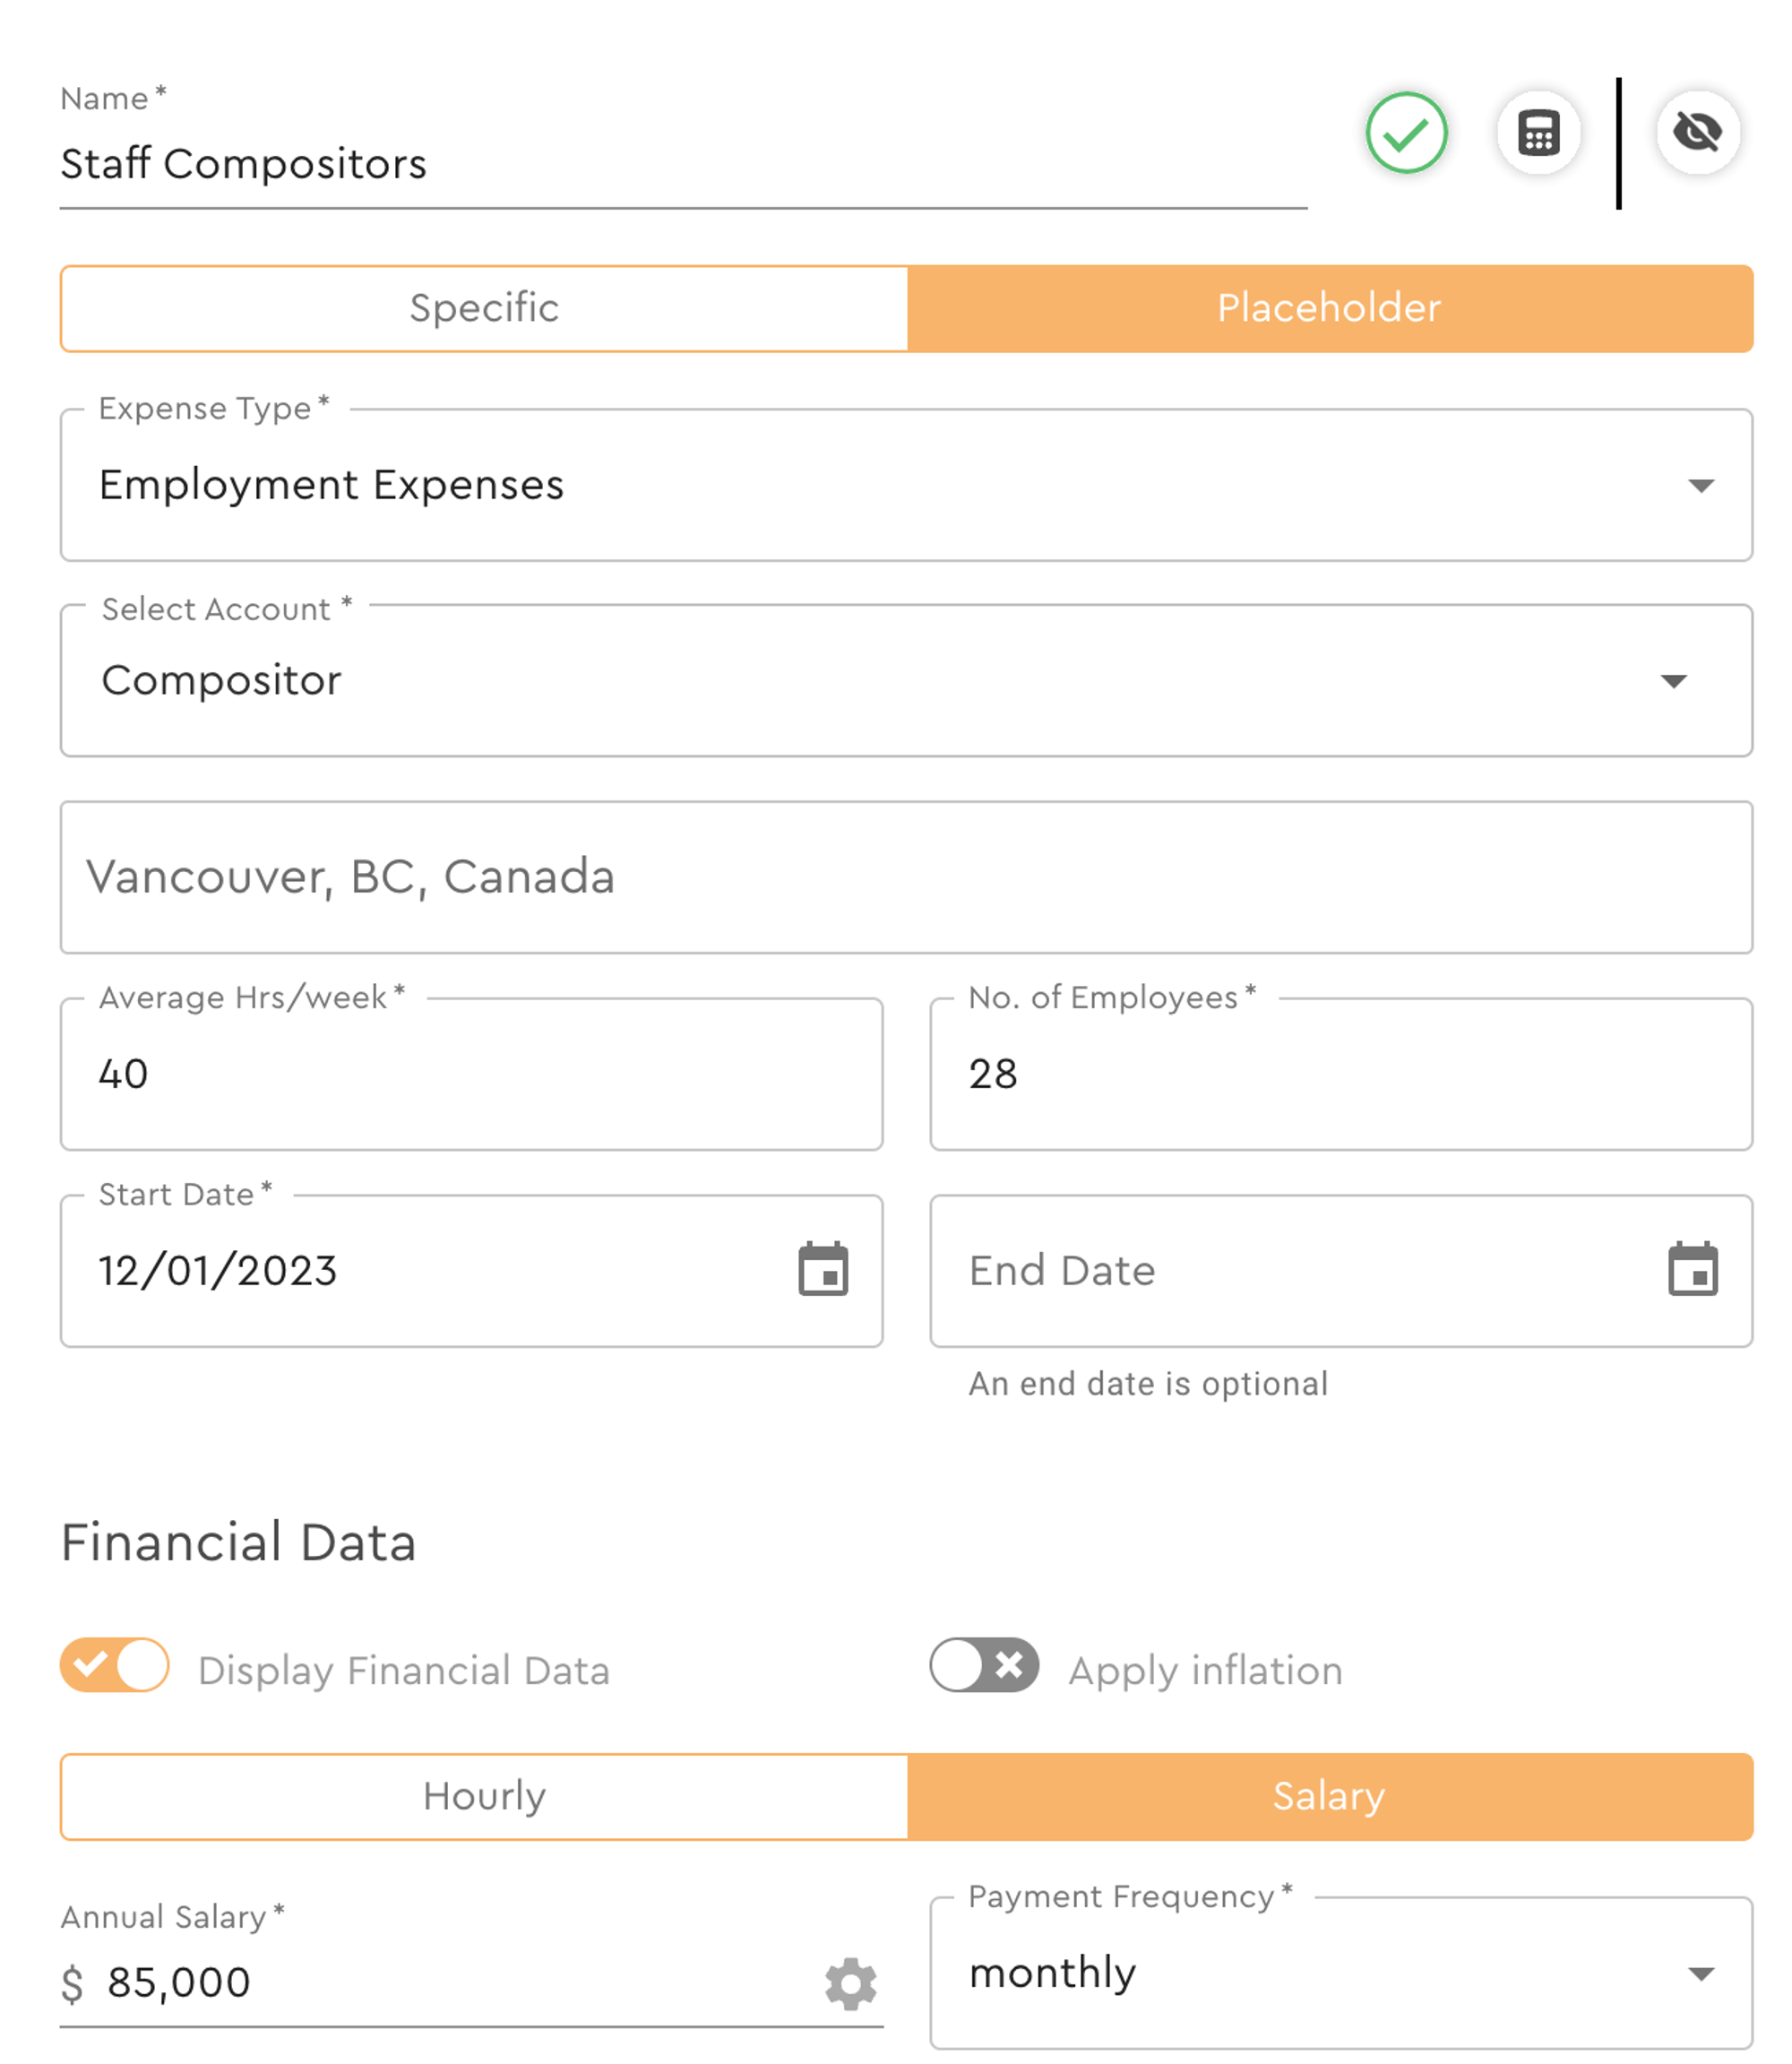 Interface for a Placeholder calculation (supports multiple employees of a type) and salary calculations.